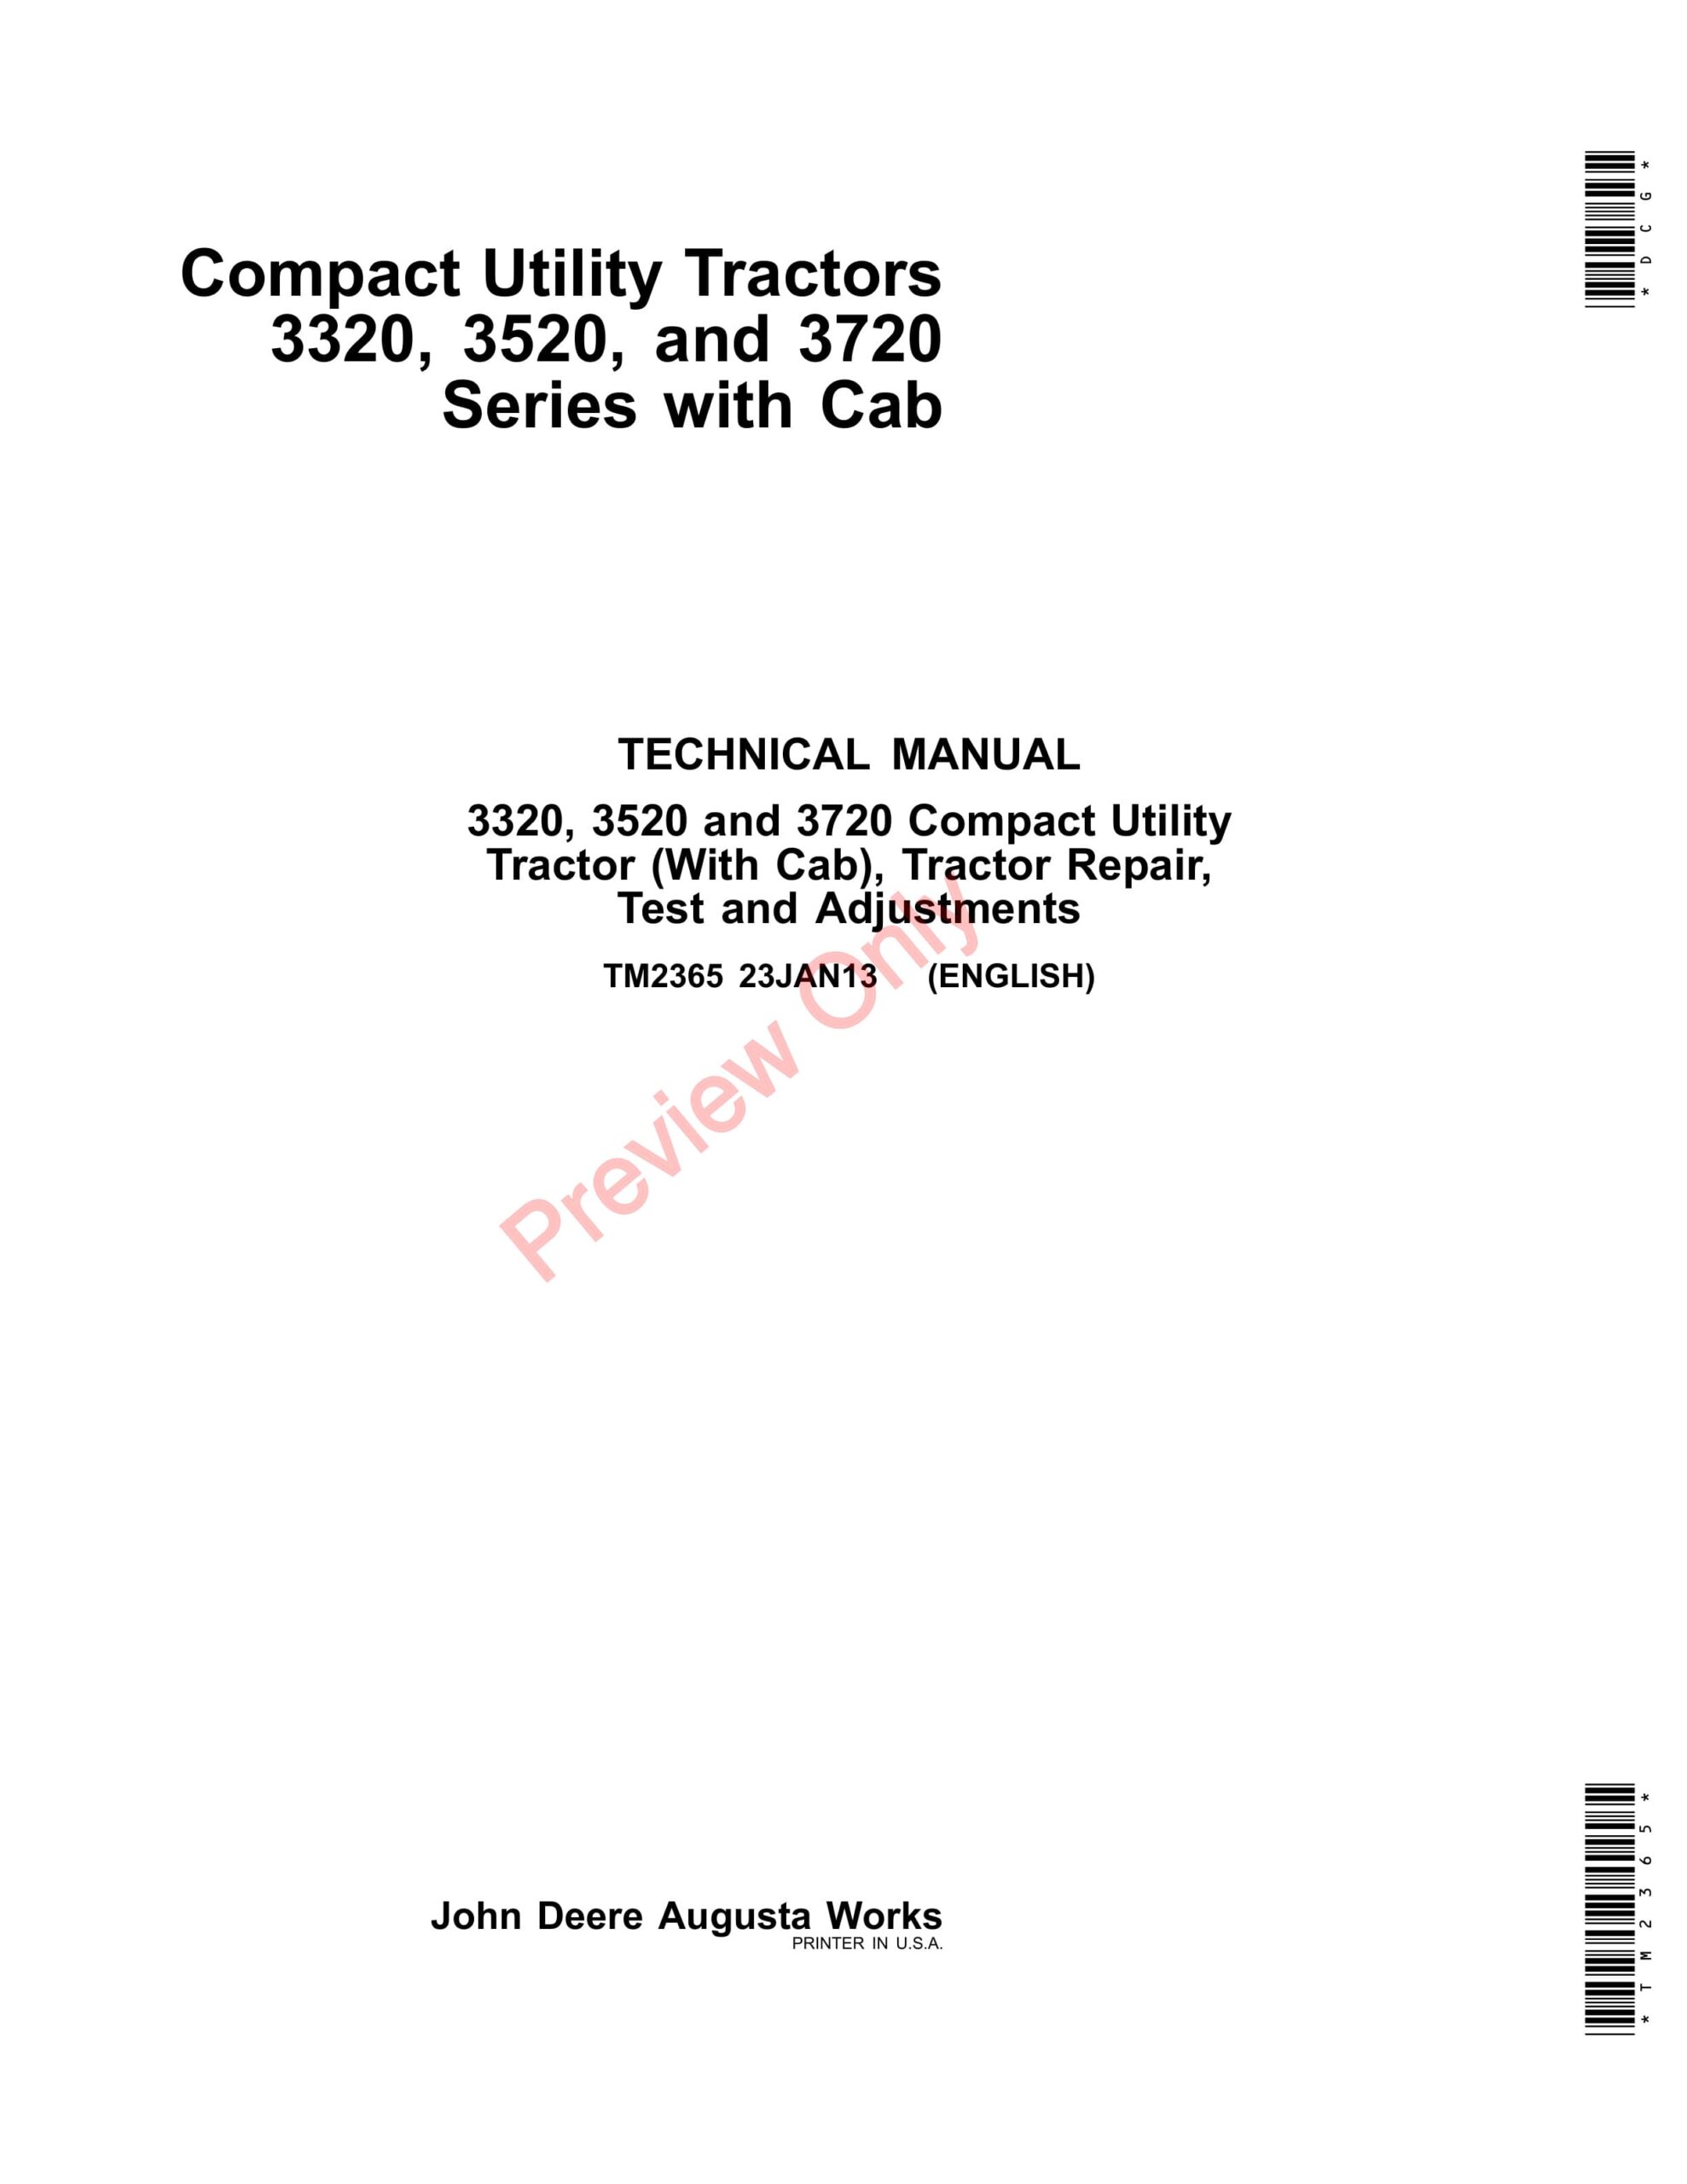 John Deere 3320, 3520 and 3720 Compact Utility Tractors (with Cab) Technical Manual TM2365 23JAN13-1